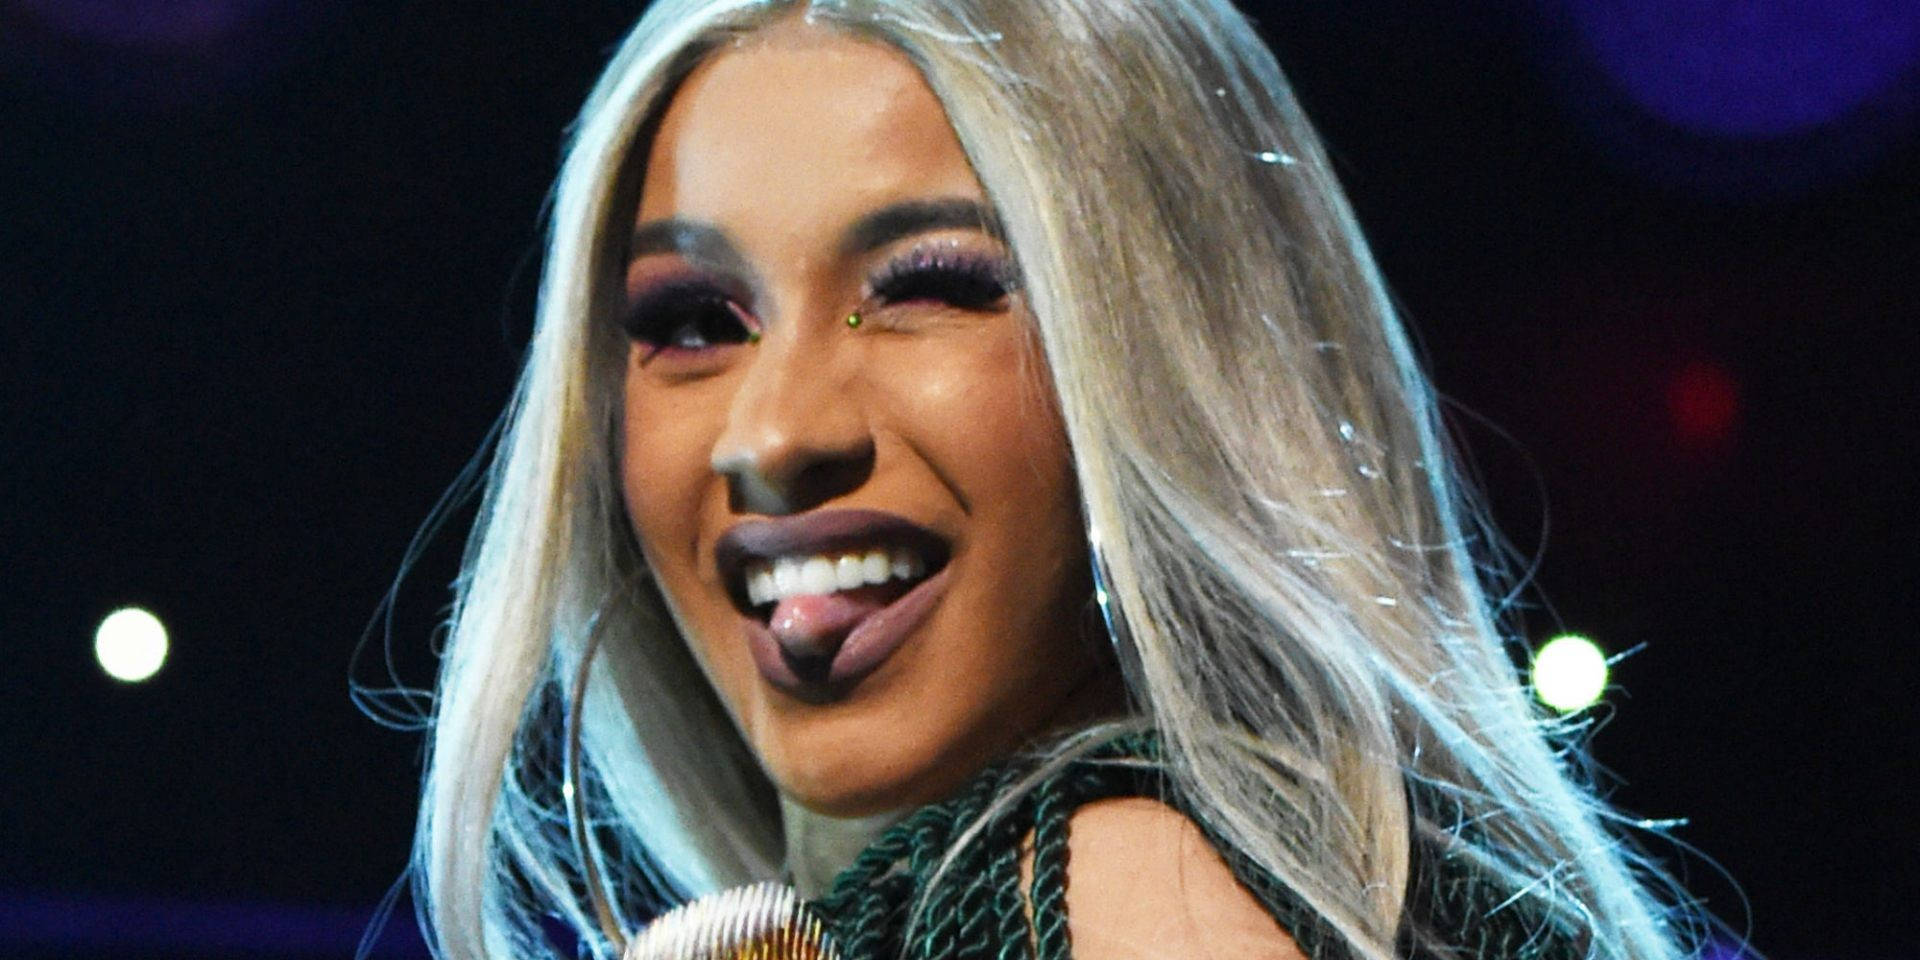 Cardi B Winking With Tongue Out